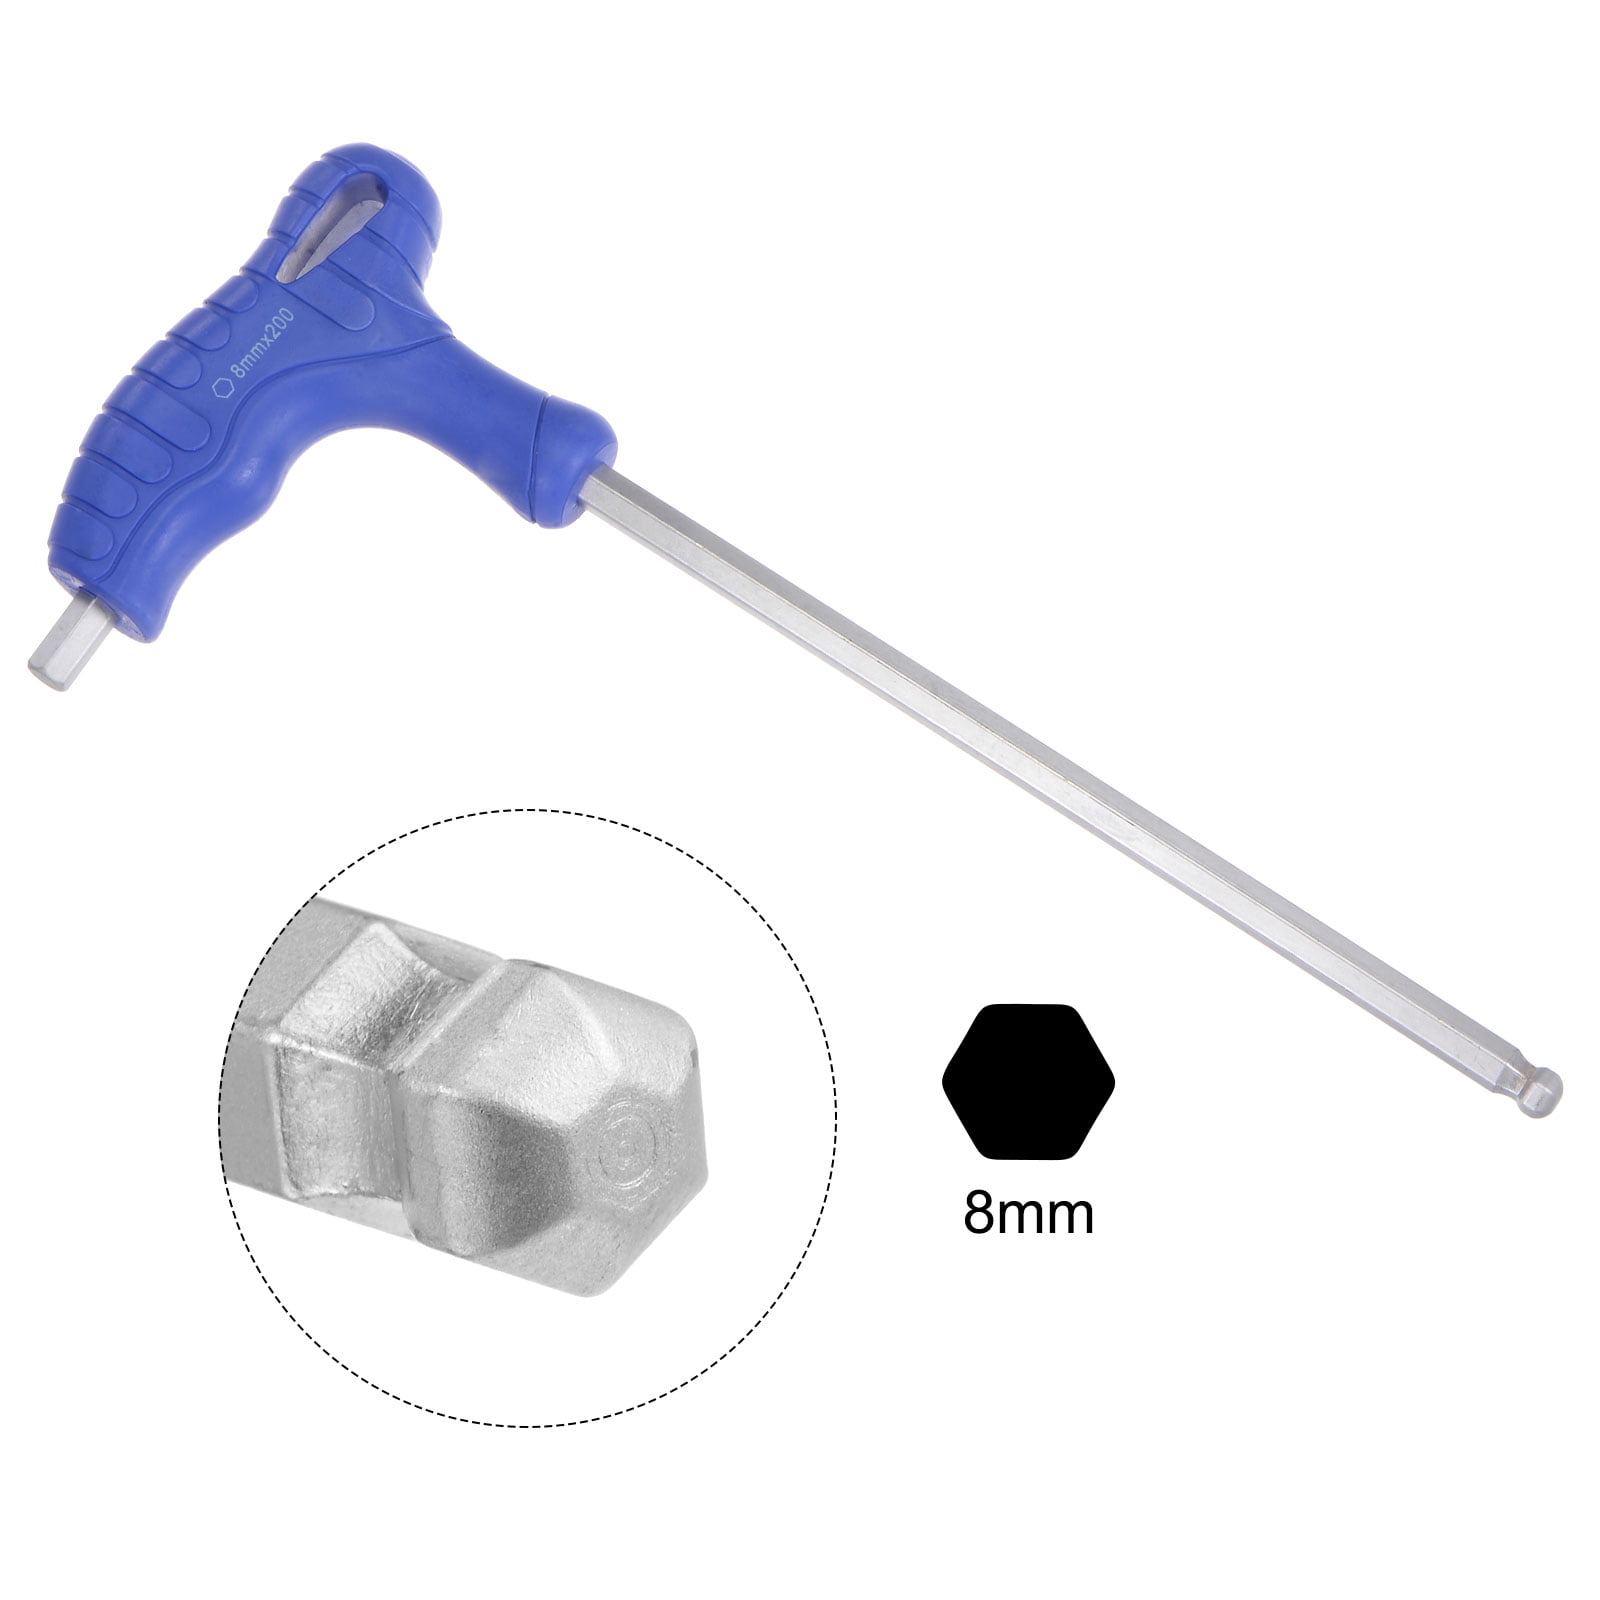 uxcell 8mm Metric T Handle Hex Socket Wrench Spanner CR-V a18032900ux0388